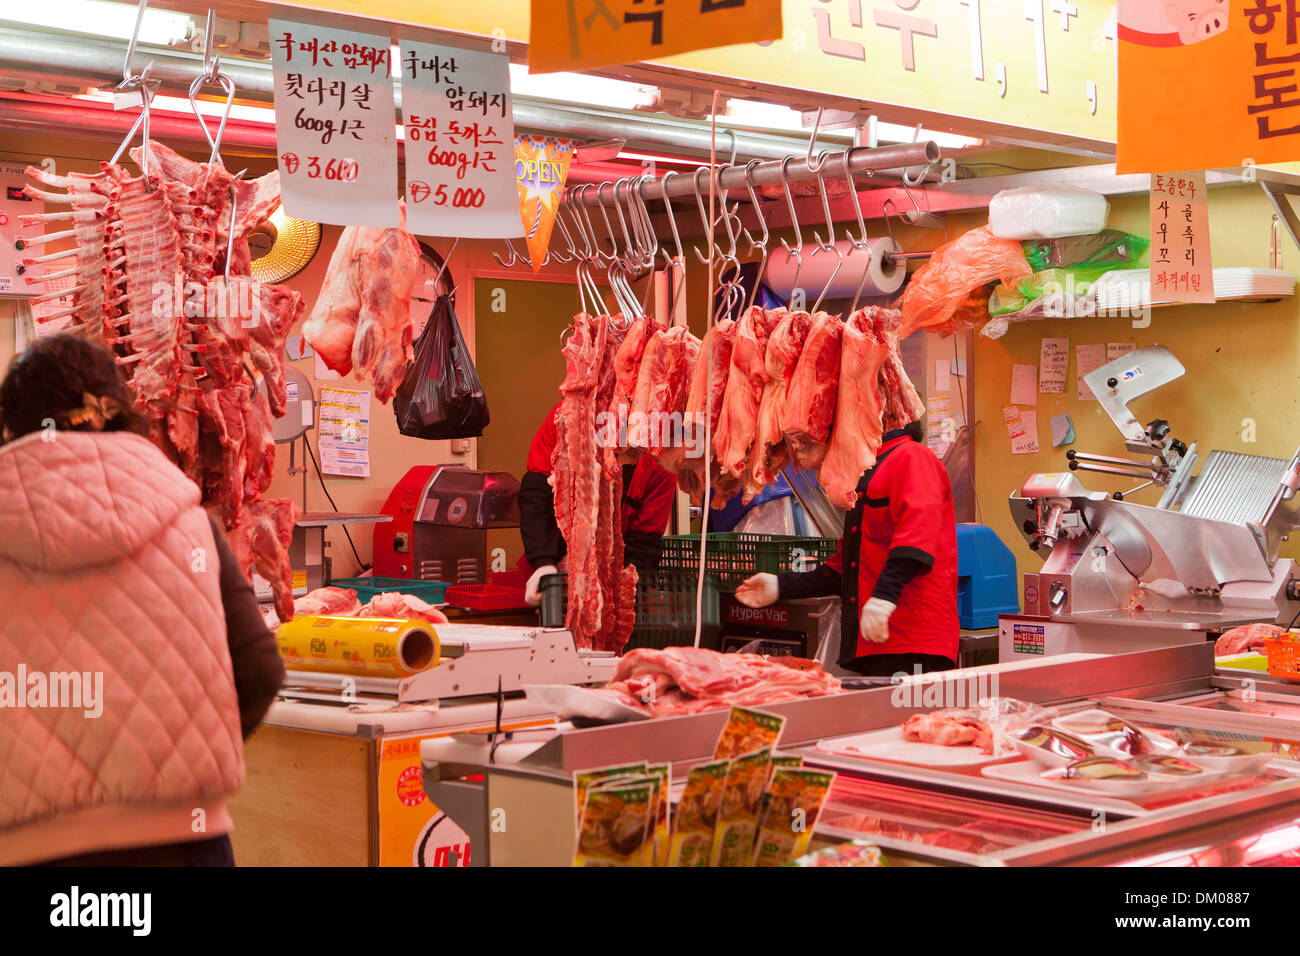 Cuts of meat hanging on hooks at a traditional market butcher shop - Seoul, South Korea Stock Photo